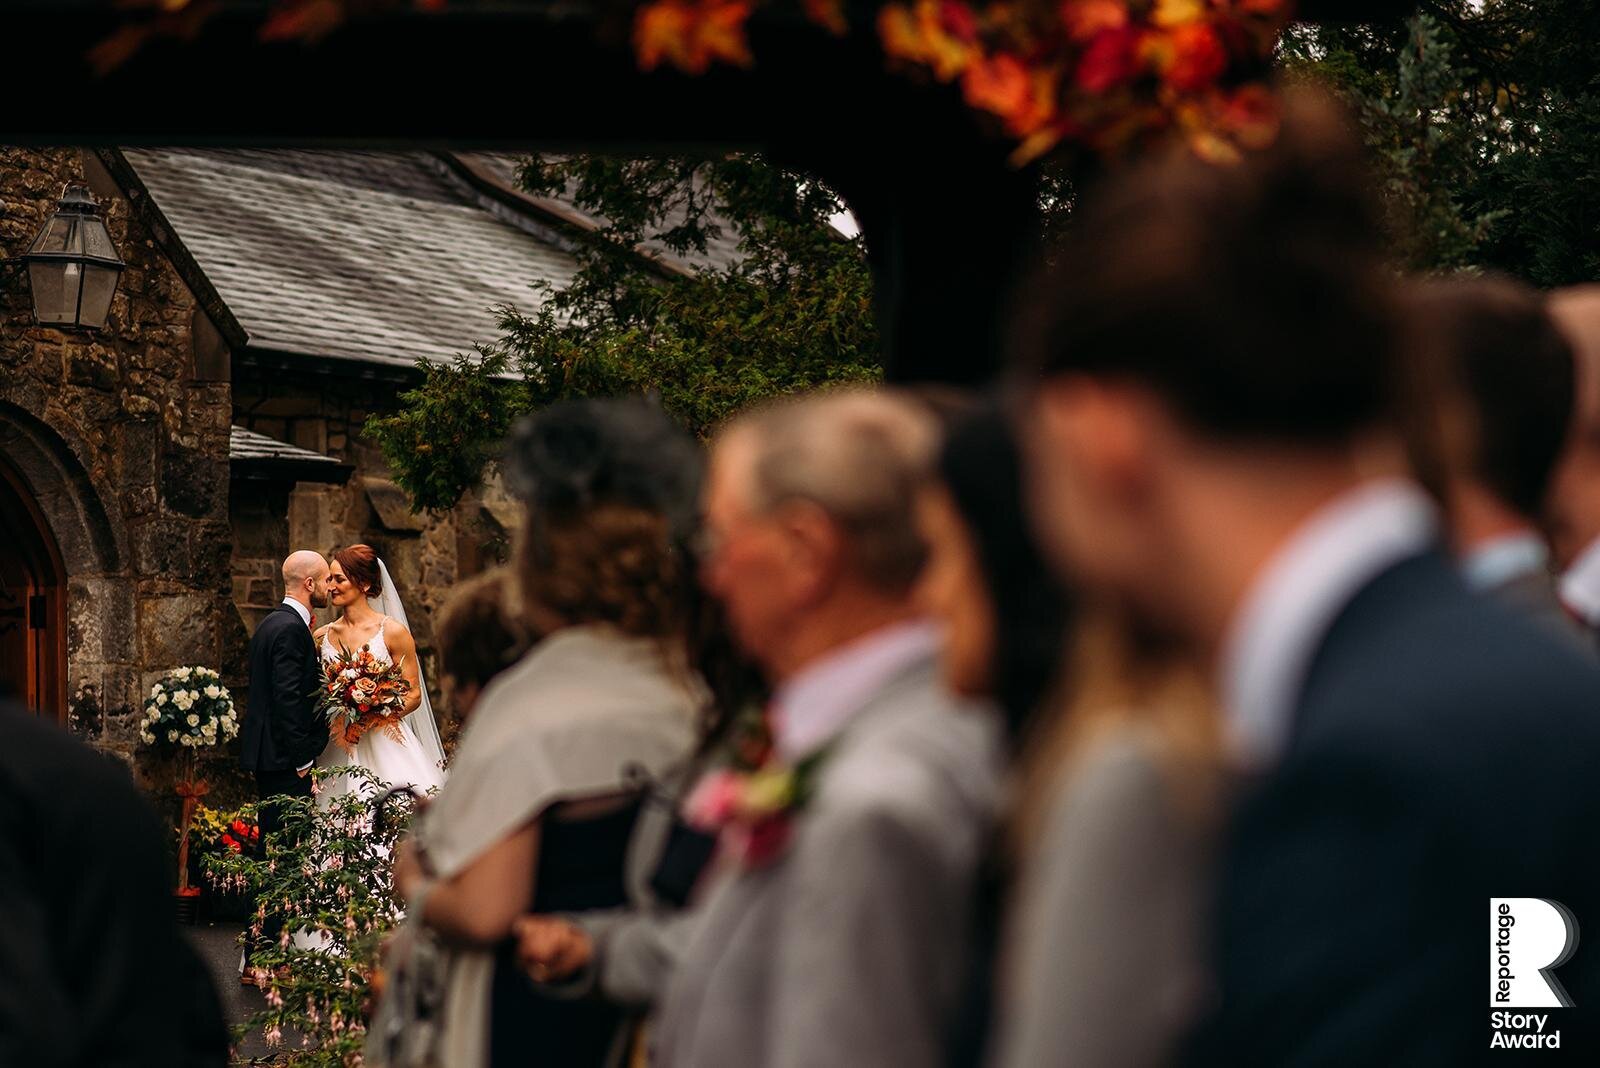  Bride and groom kiss as their guests wait to throw confetti on them. 